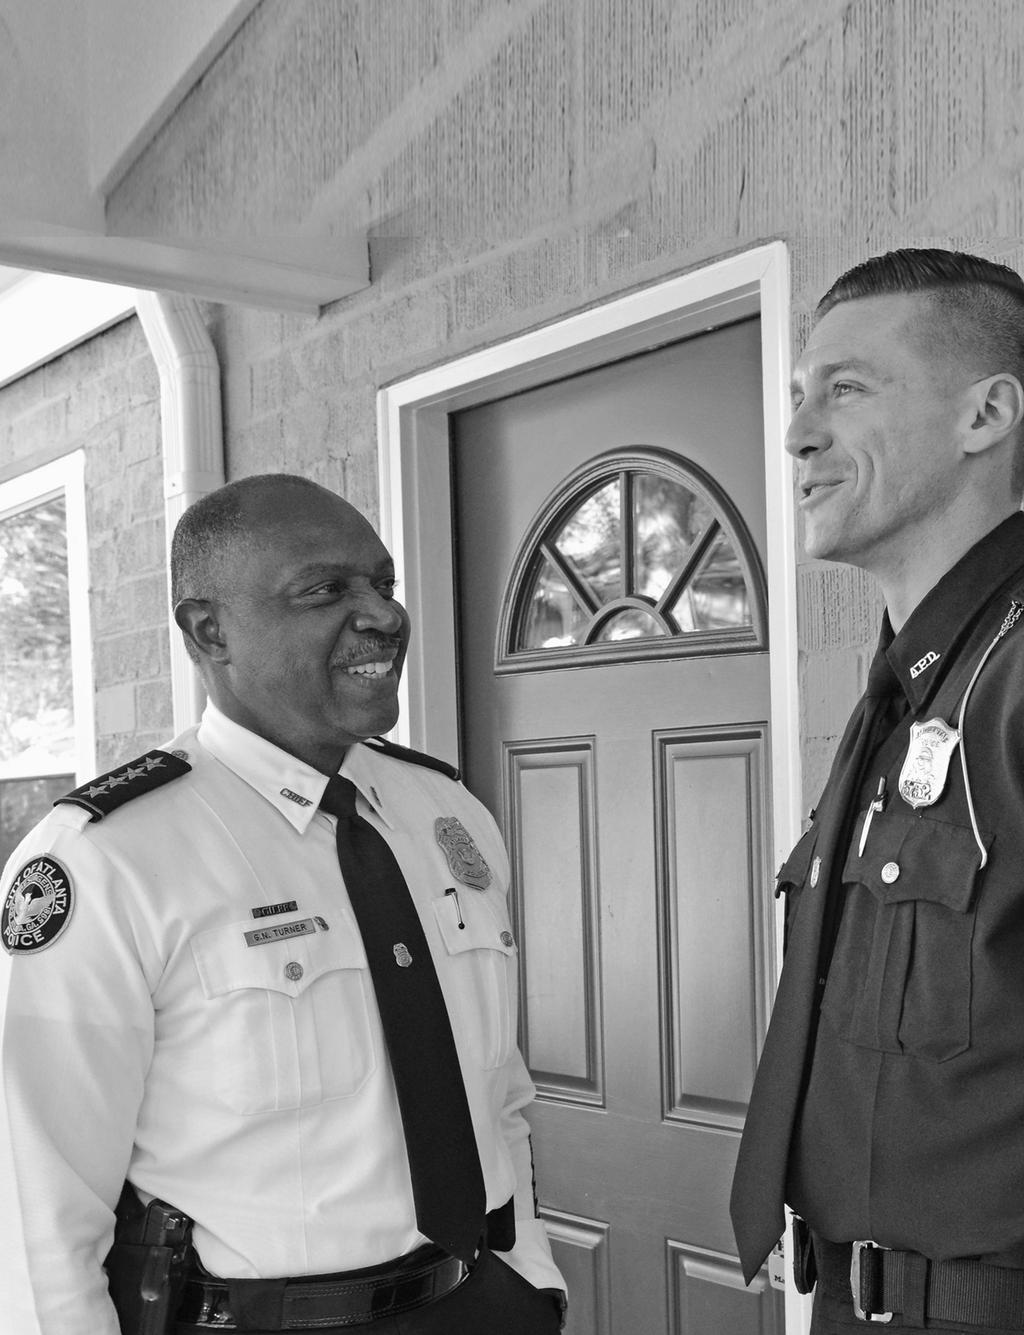 SECURE NEIGHBORHOODS INCREASED POLICE VISIBILITY The APF has created new opportunities for officers to purchase homes in strategic neighborhoods throughout Atlanta, to increase police visibility and